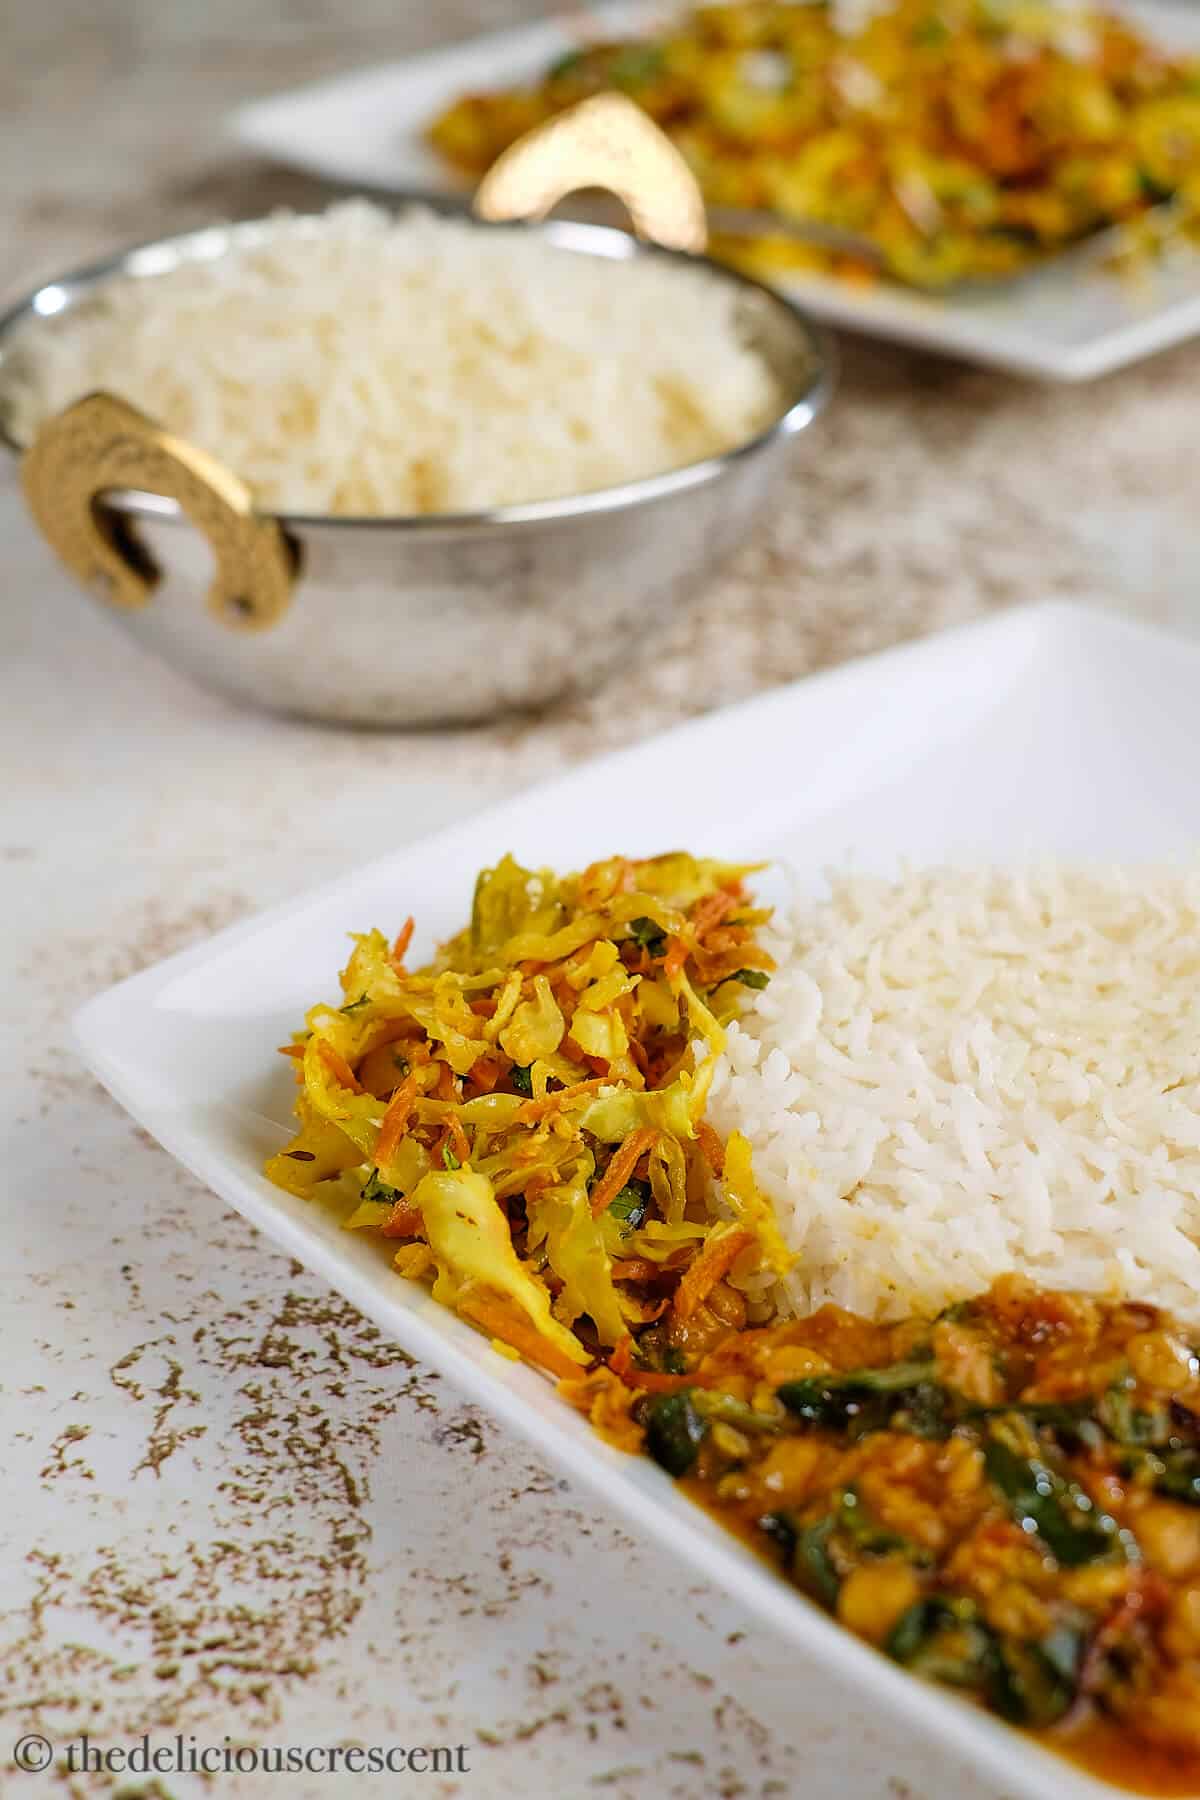 Oven roasted cabbage poriyal served with rice and dal.